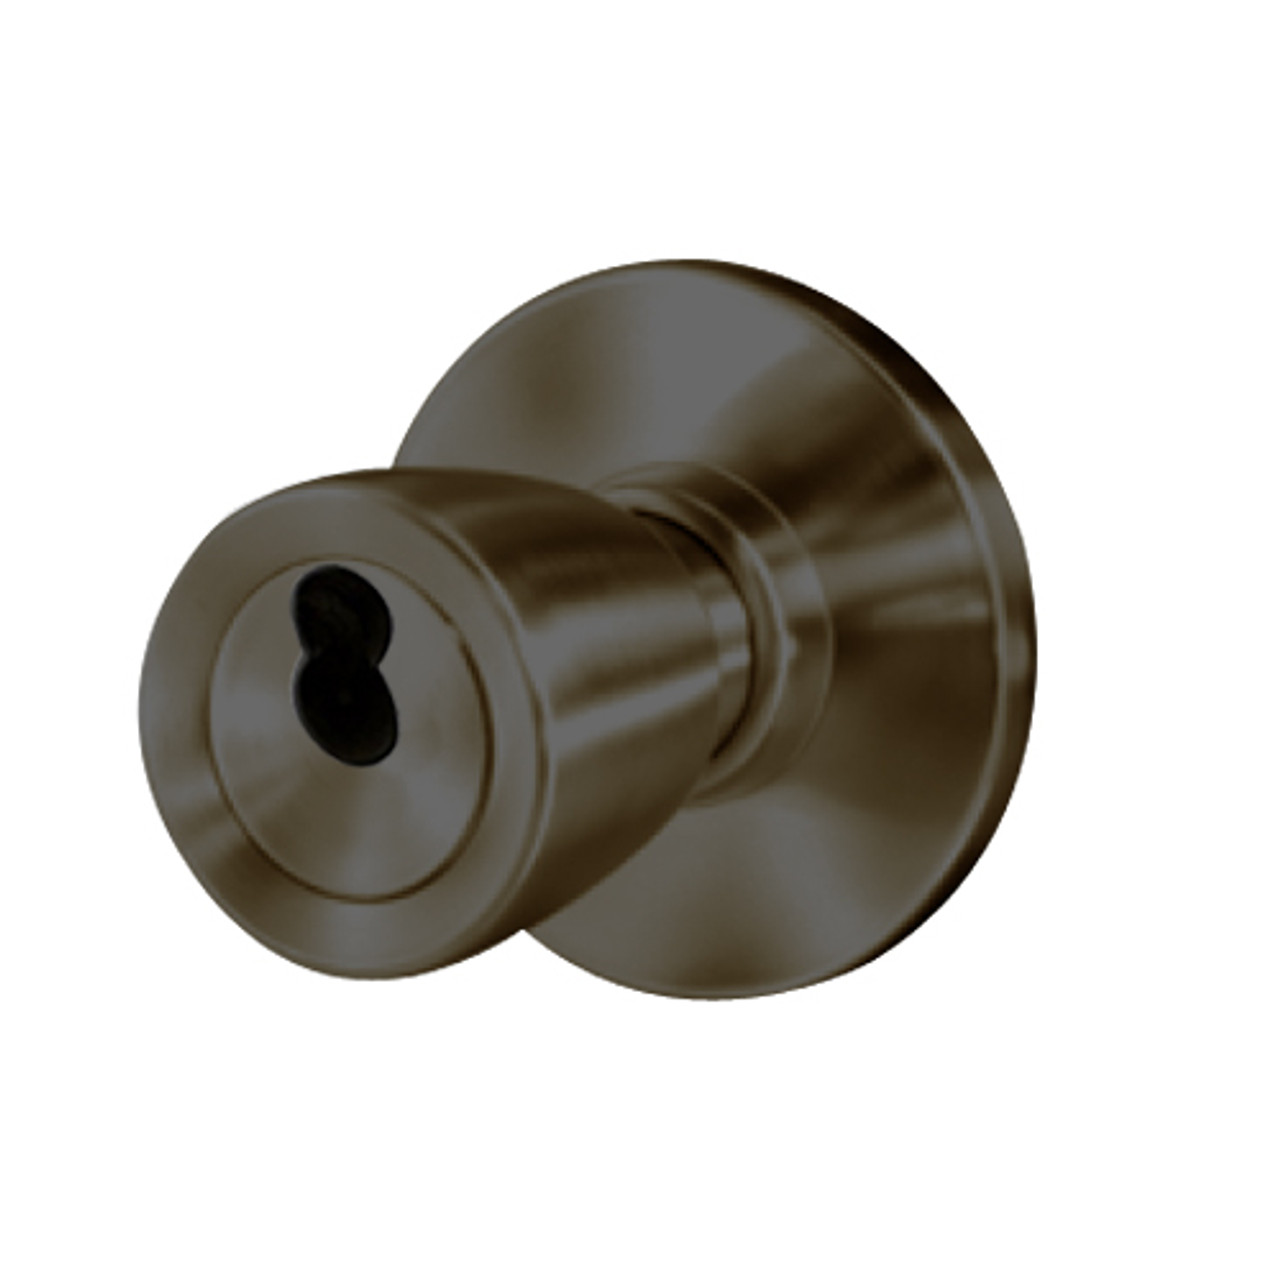 8K57YD6AS3613 Best 8K Series Exit Heavy Duty Cylindrical Knob Locks with Tulip Style in Oil Rubbed Bronze